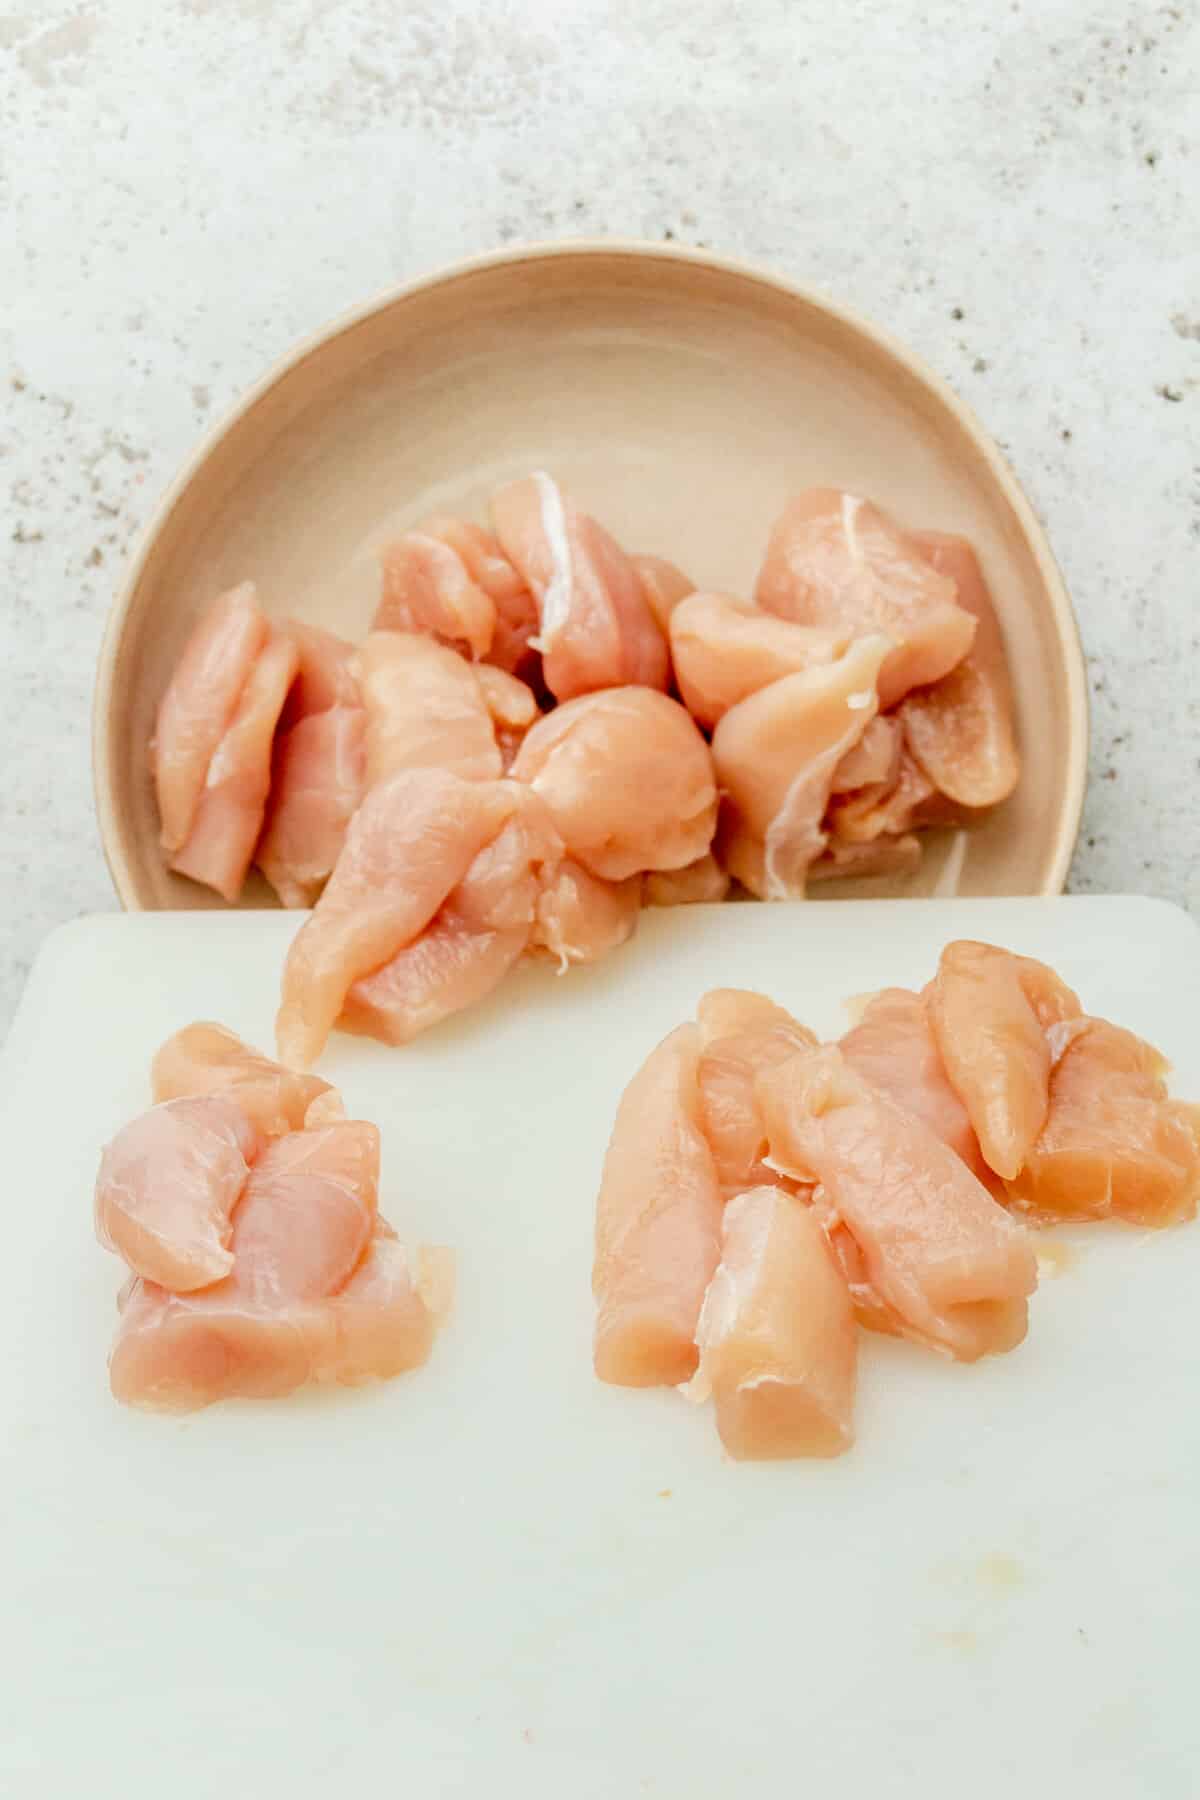 Sliced pieces of chicken tenders are slid into a shallow ceramic bowl on a light grey surface.